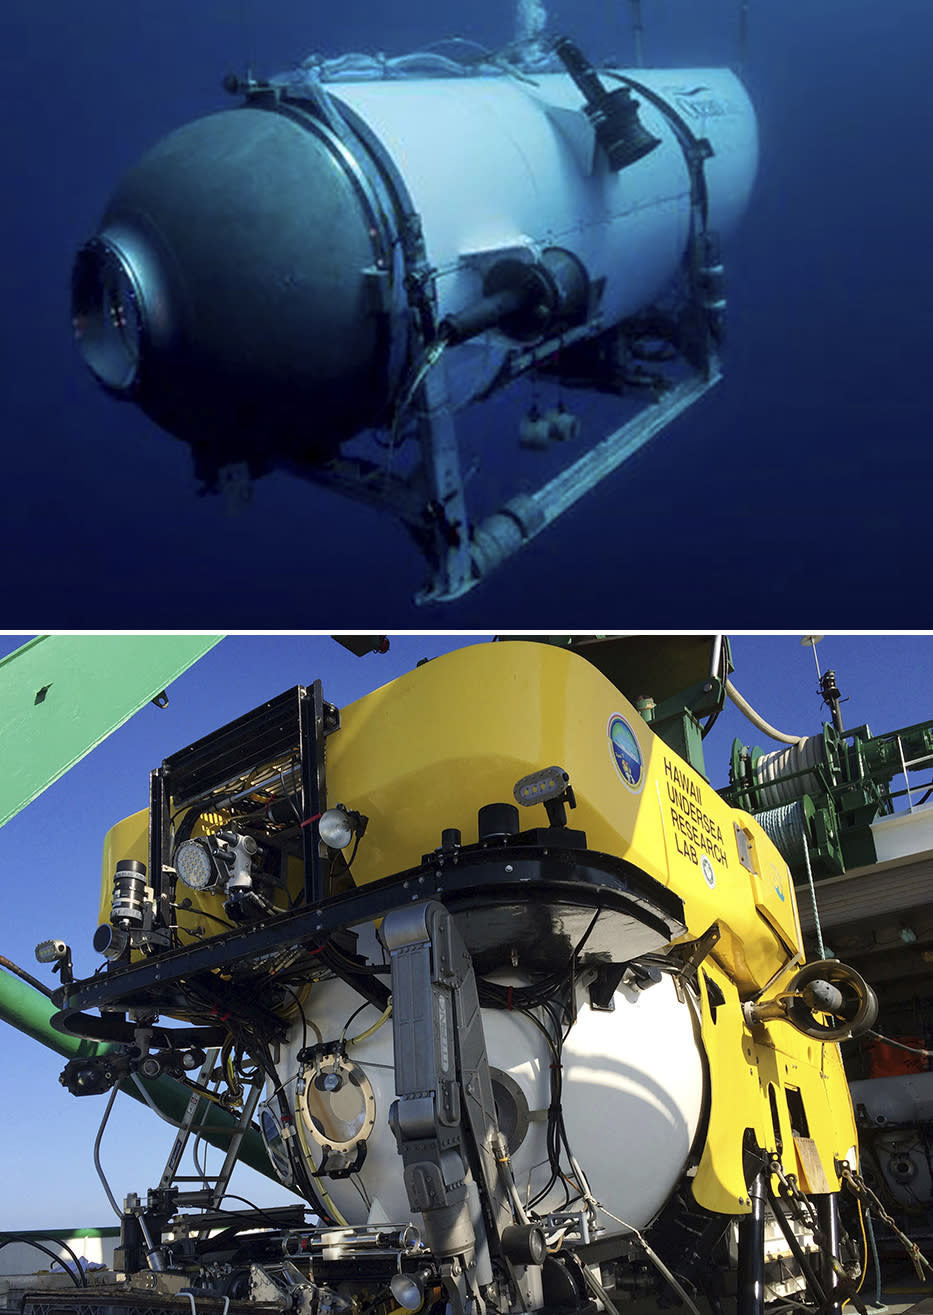 This photo combo shows OceanGate Expeditions' Titan submersible (top) and The Pisces IV submersible (bottom). The Titan, developed and operated by OceanGate Expeditions, was touted for a design that included a carbon fiber hull, an elongated cabin for crew and passengers, and more. But outside experts say the design and construction of the submersible put greater stress on its structure. (AP Photo/File)